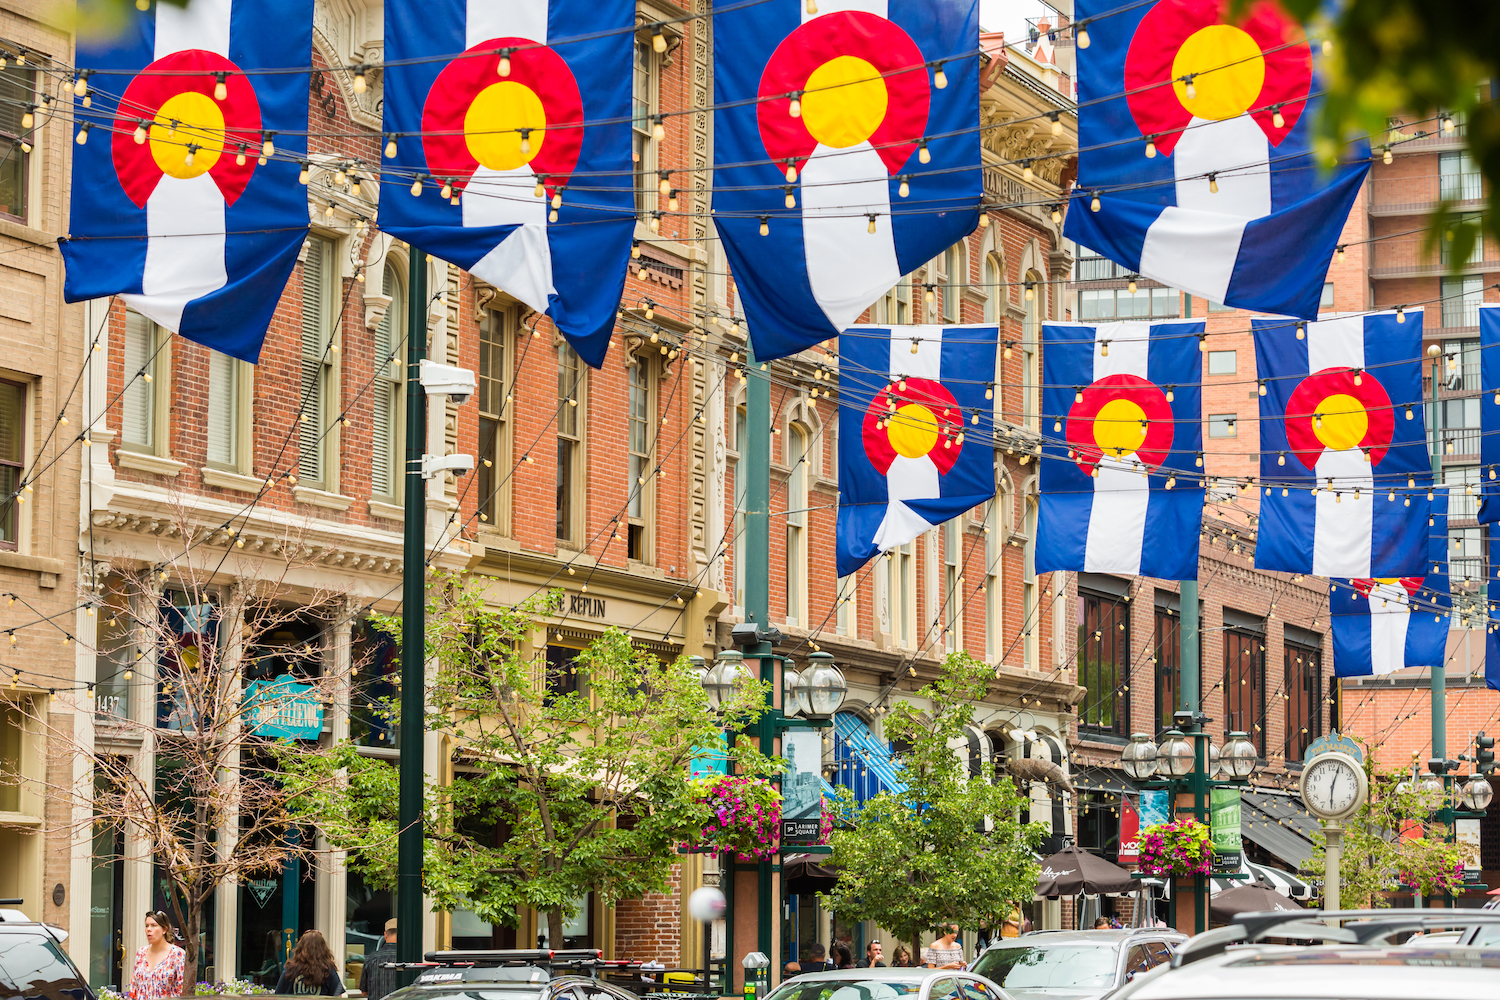 Colorado flags hang from Larimer Square storefronts in Denver.